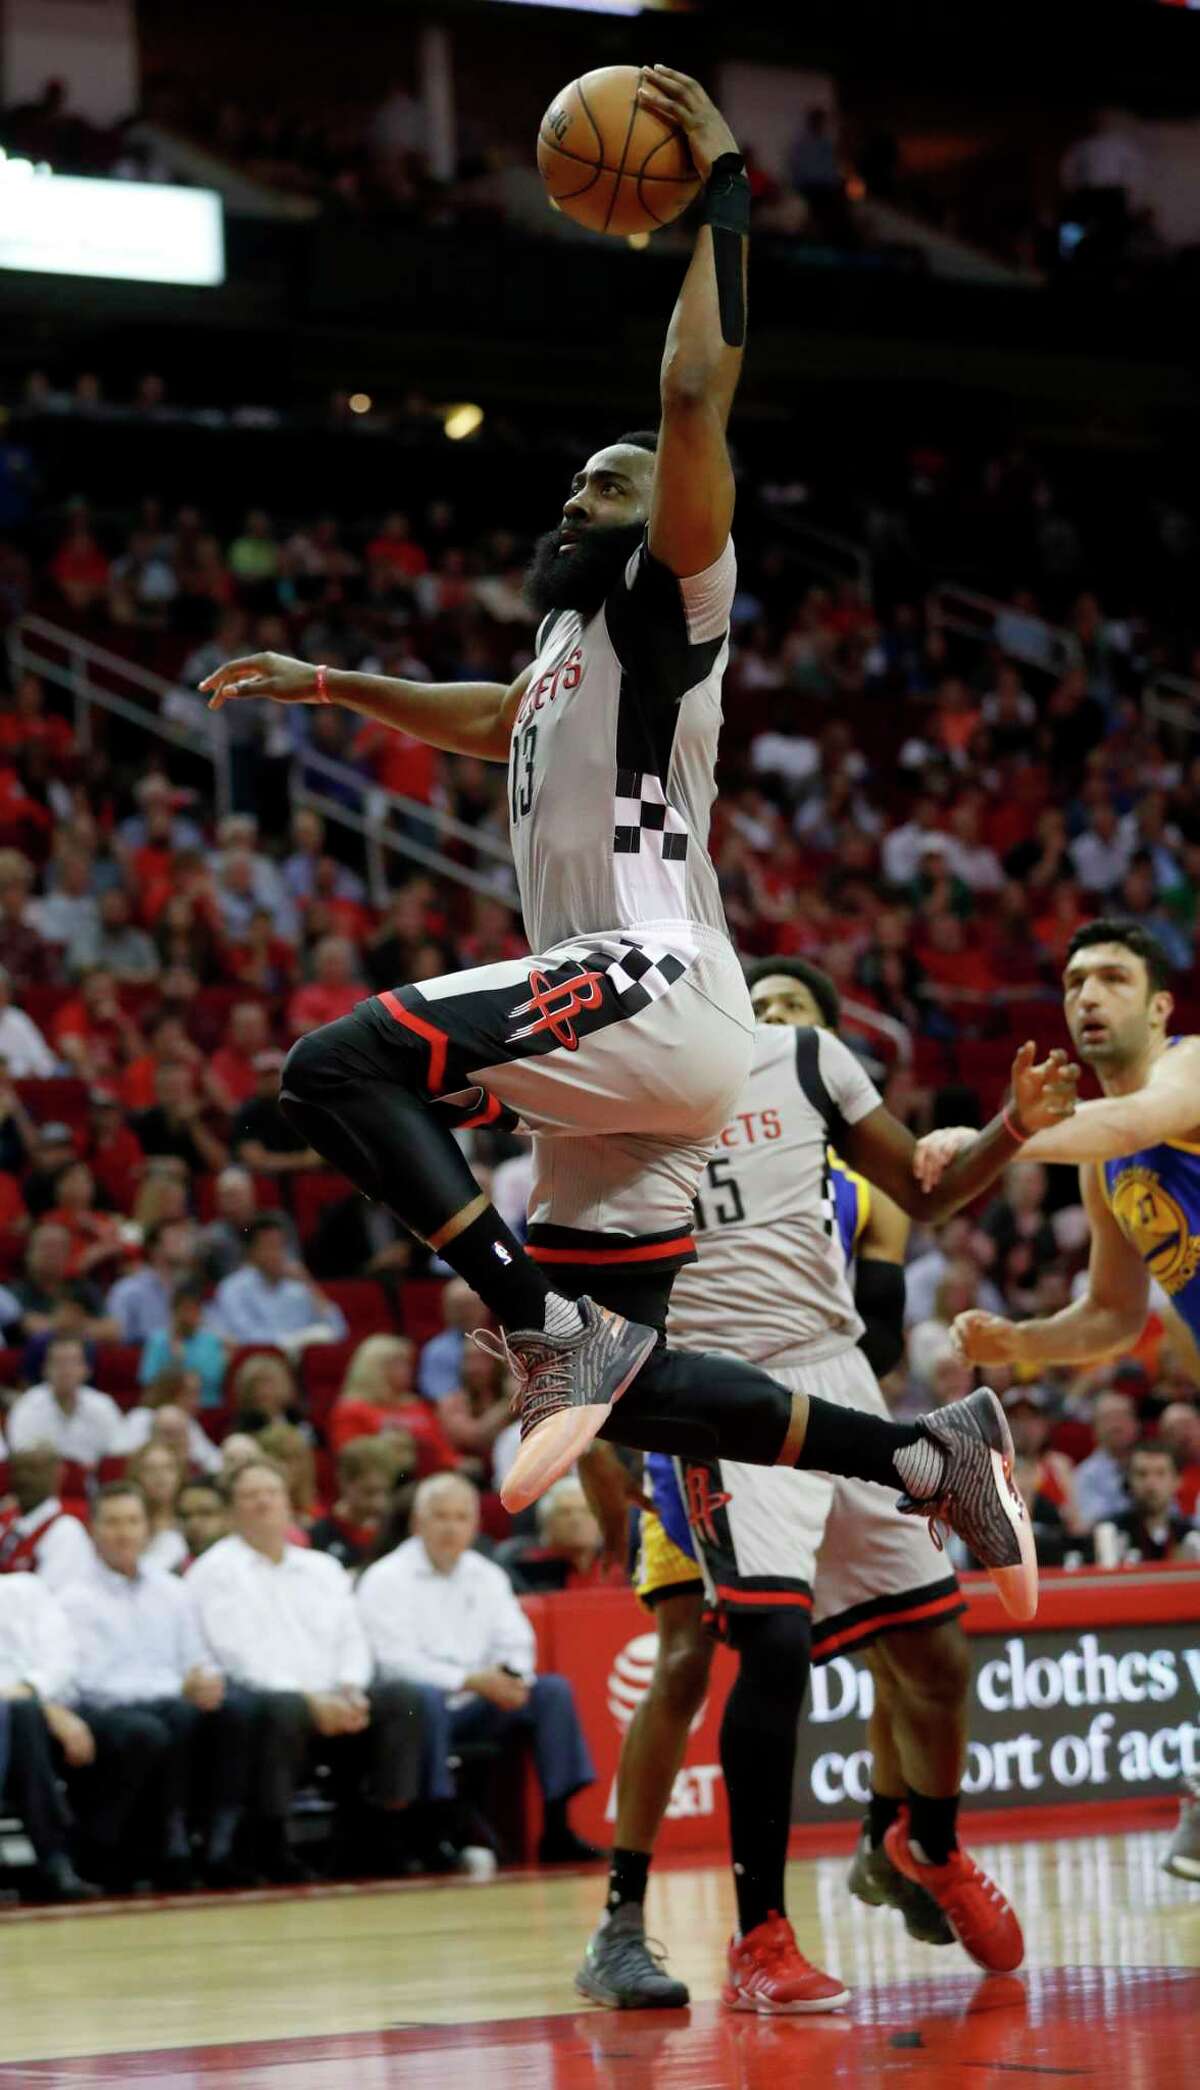 Houston Rockets guard James Harden (13) goes up for a basket attempt during the first half of an NBA basketball game at the Toyota Center, Tuesday, March 28, 2017, in Houston.